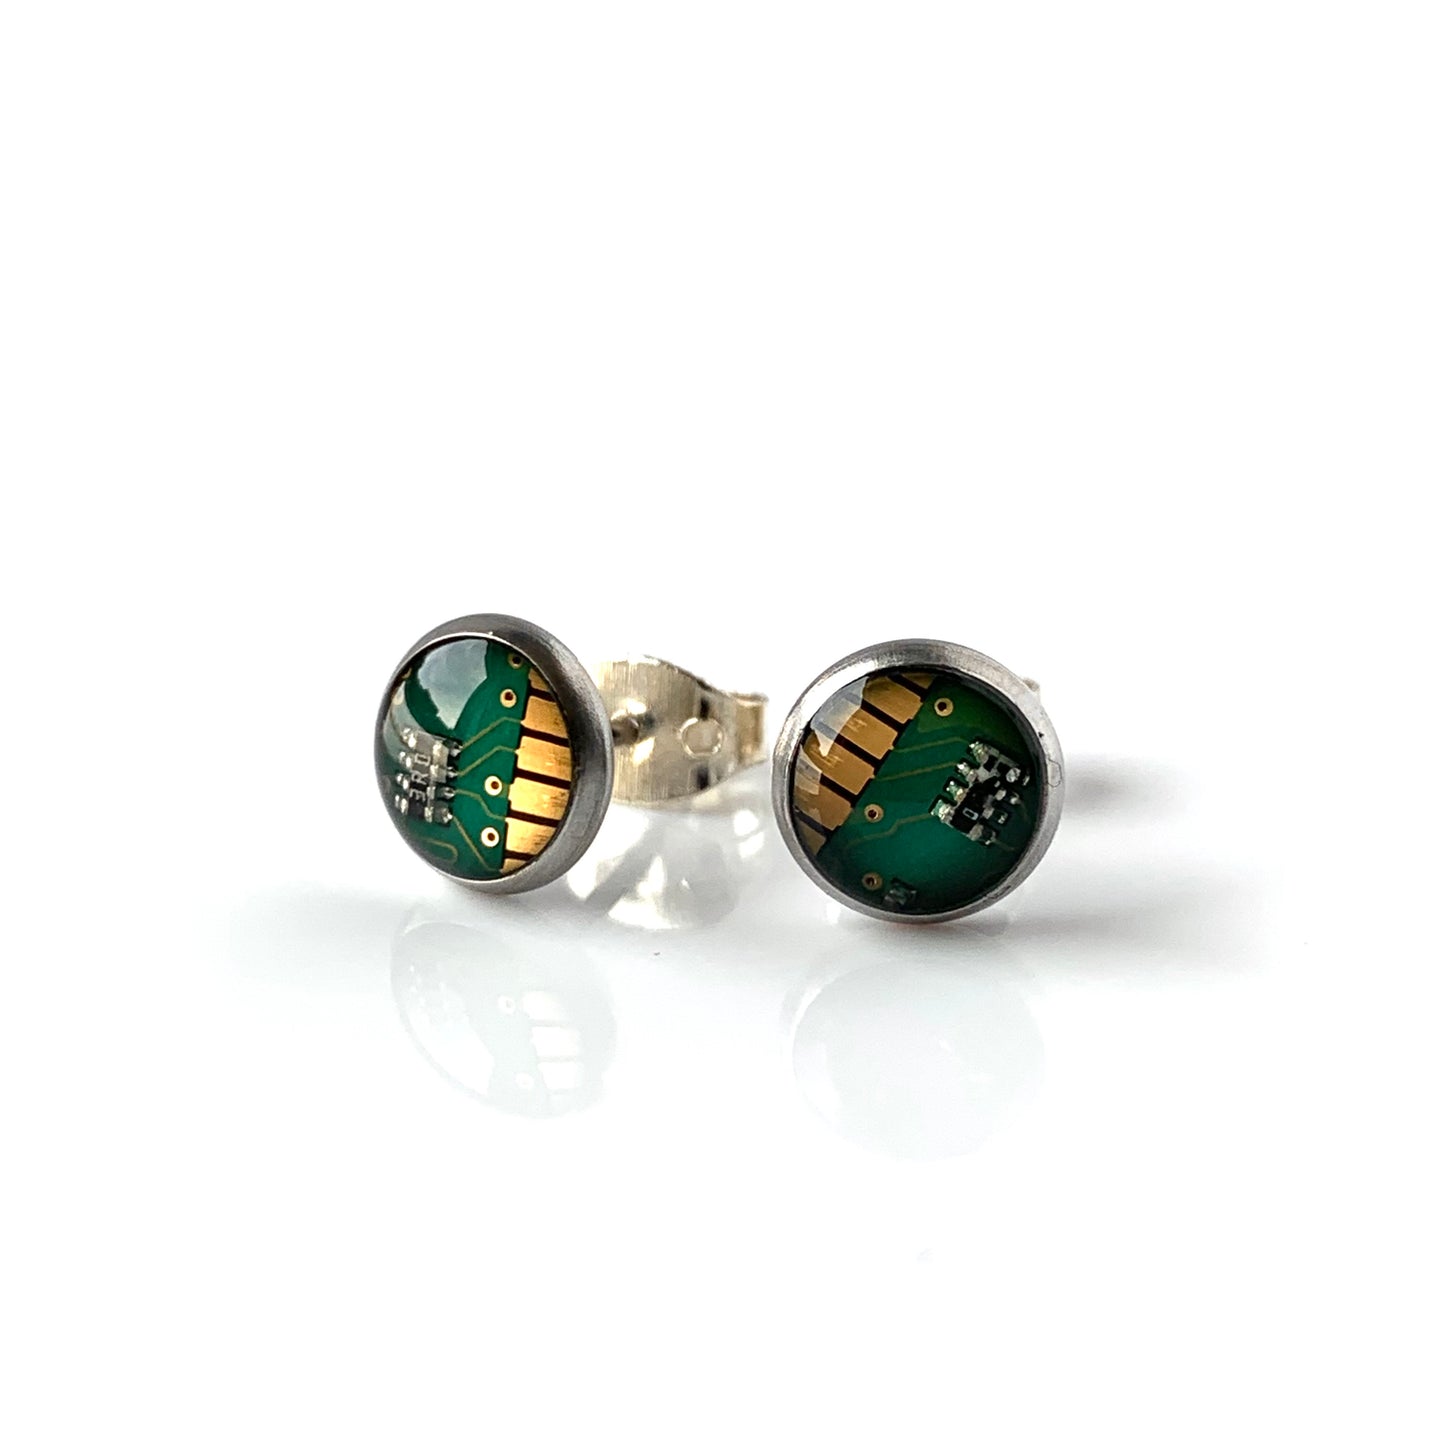 6mm Round Studs made from Circuit Board